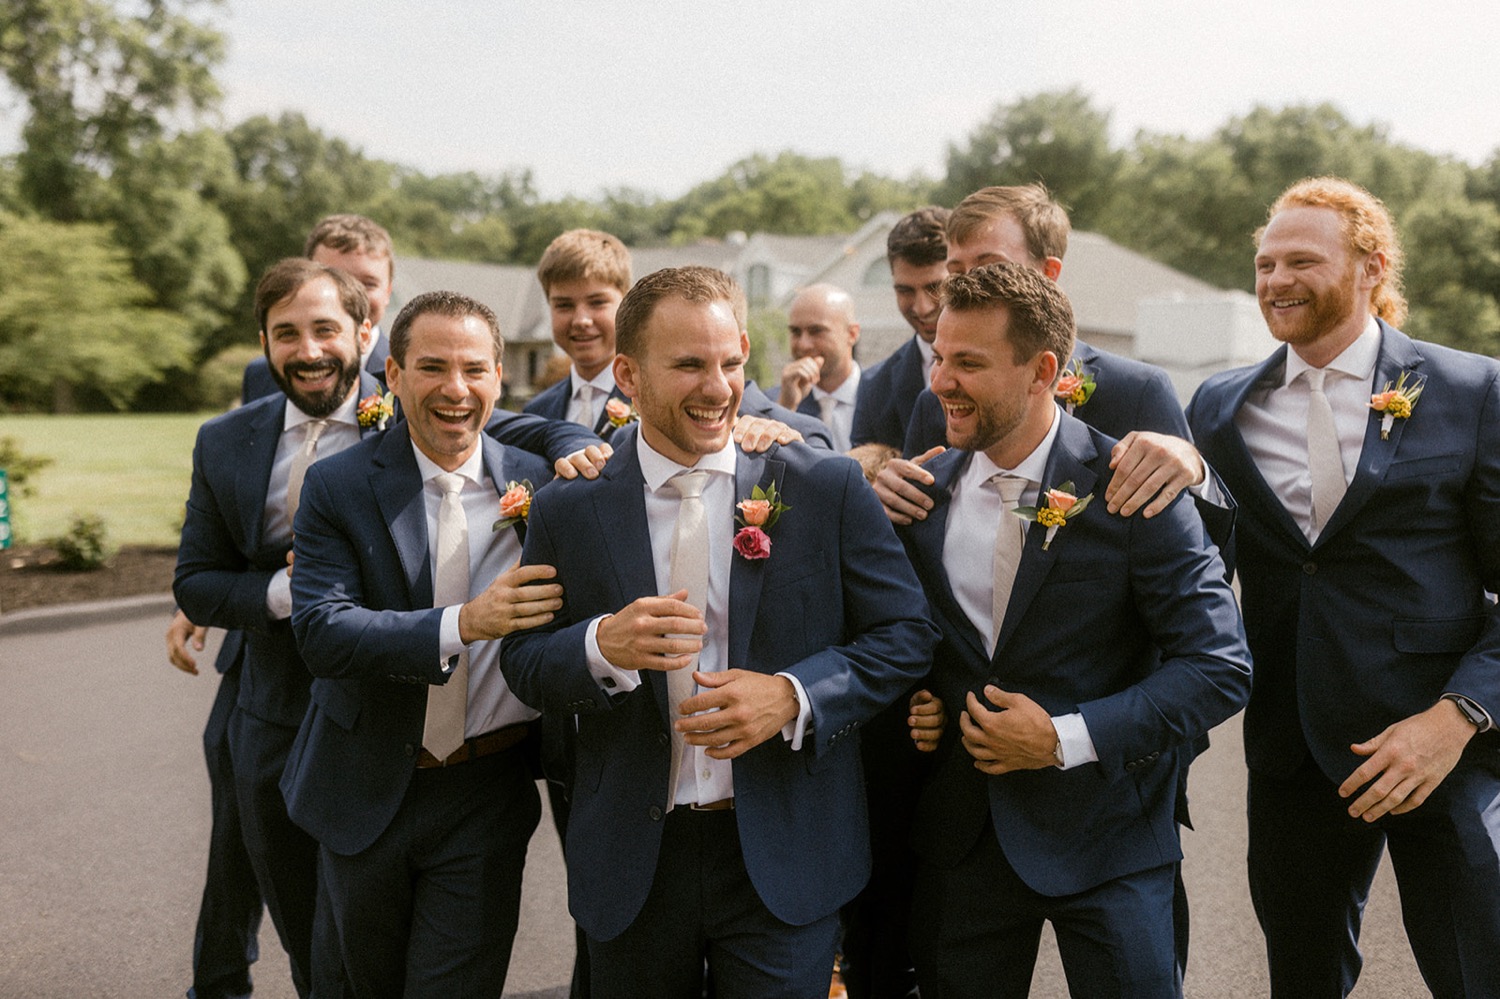 wedding party groomsmen navy suits laughing